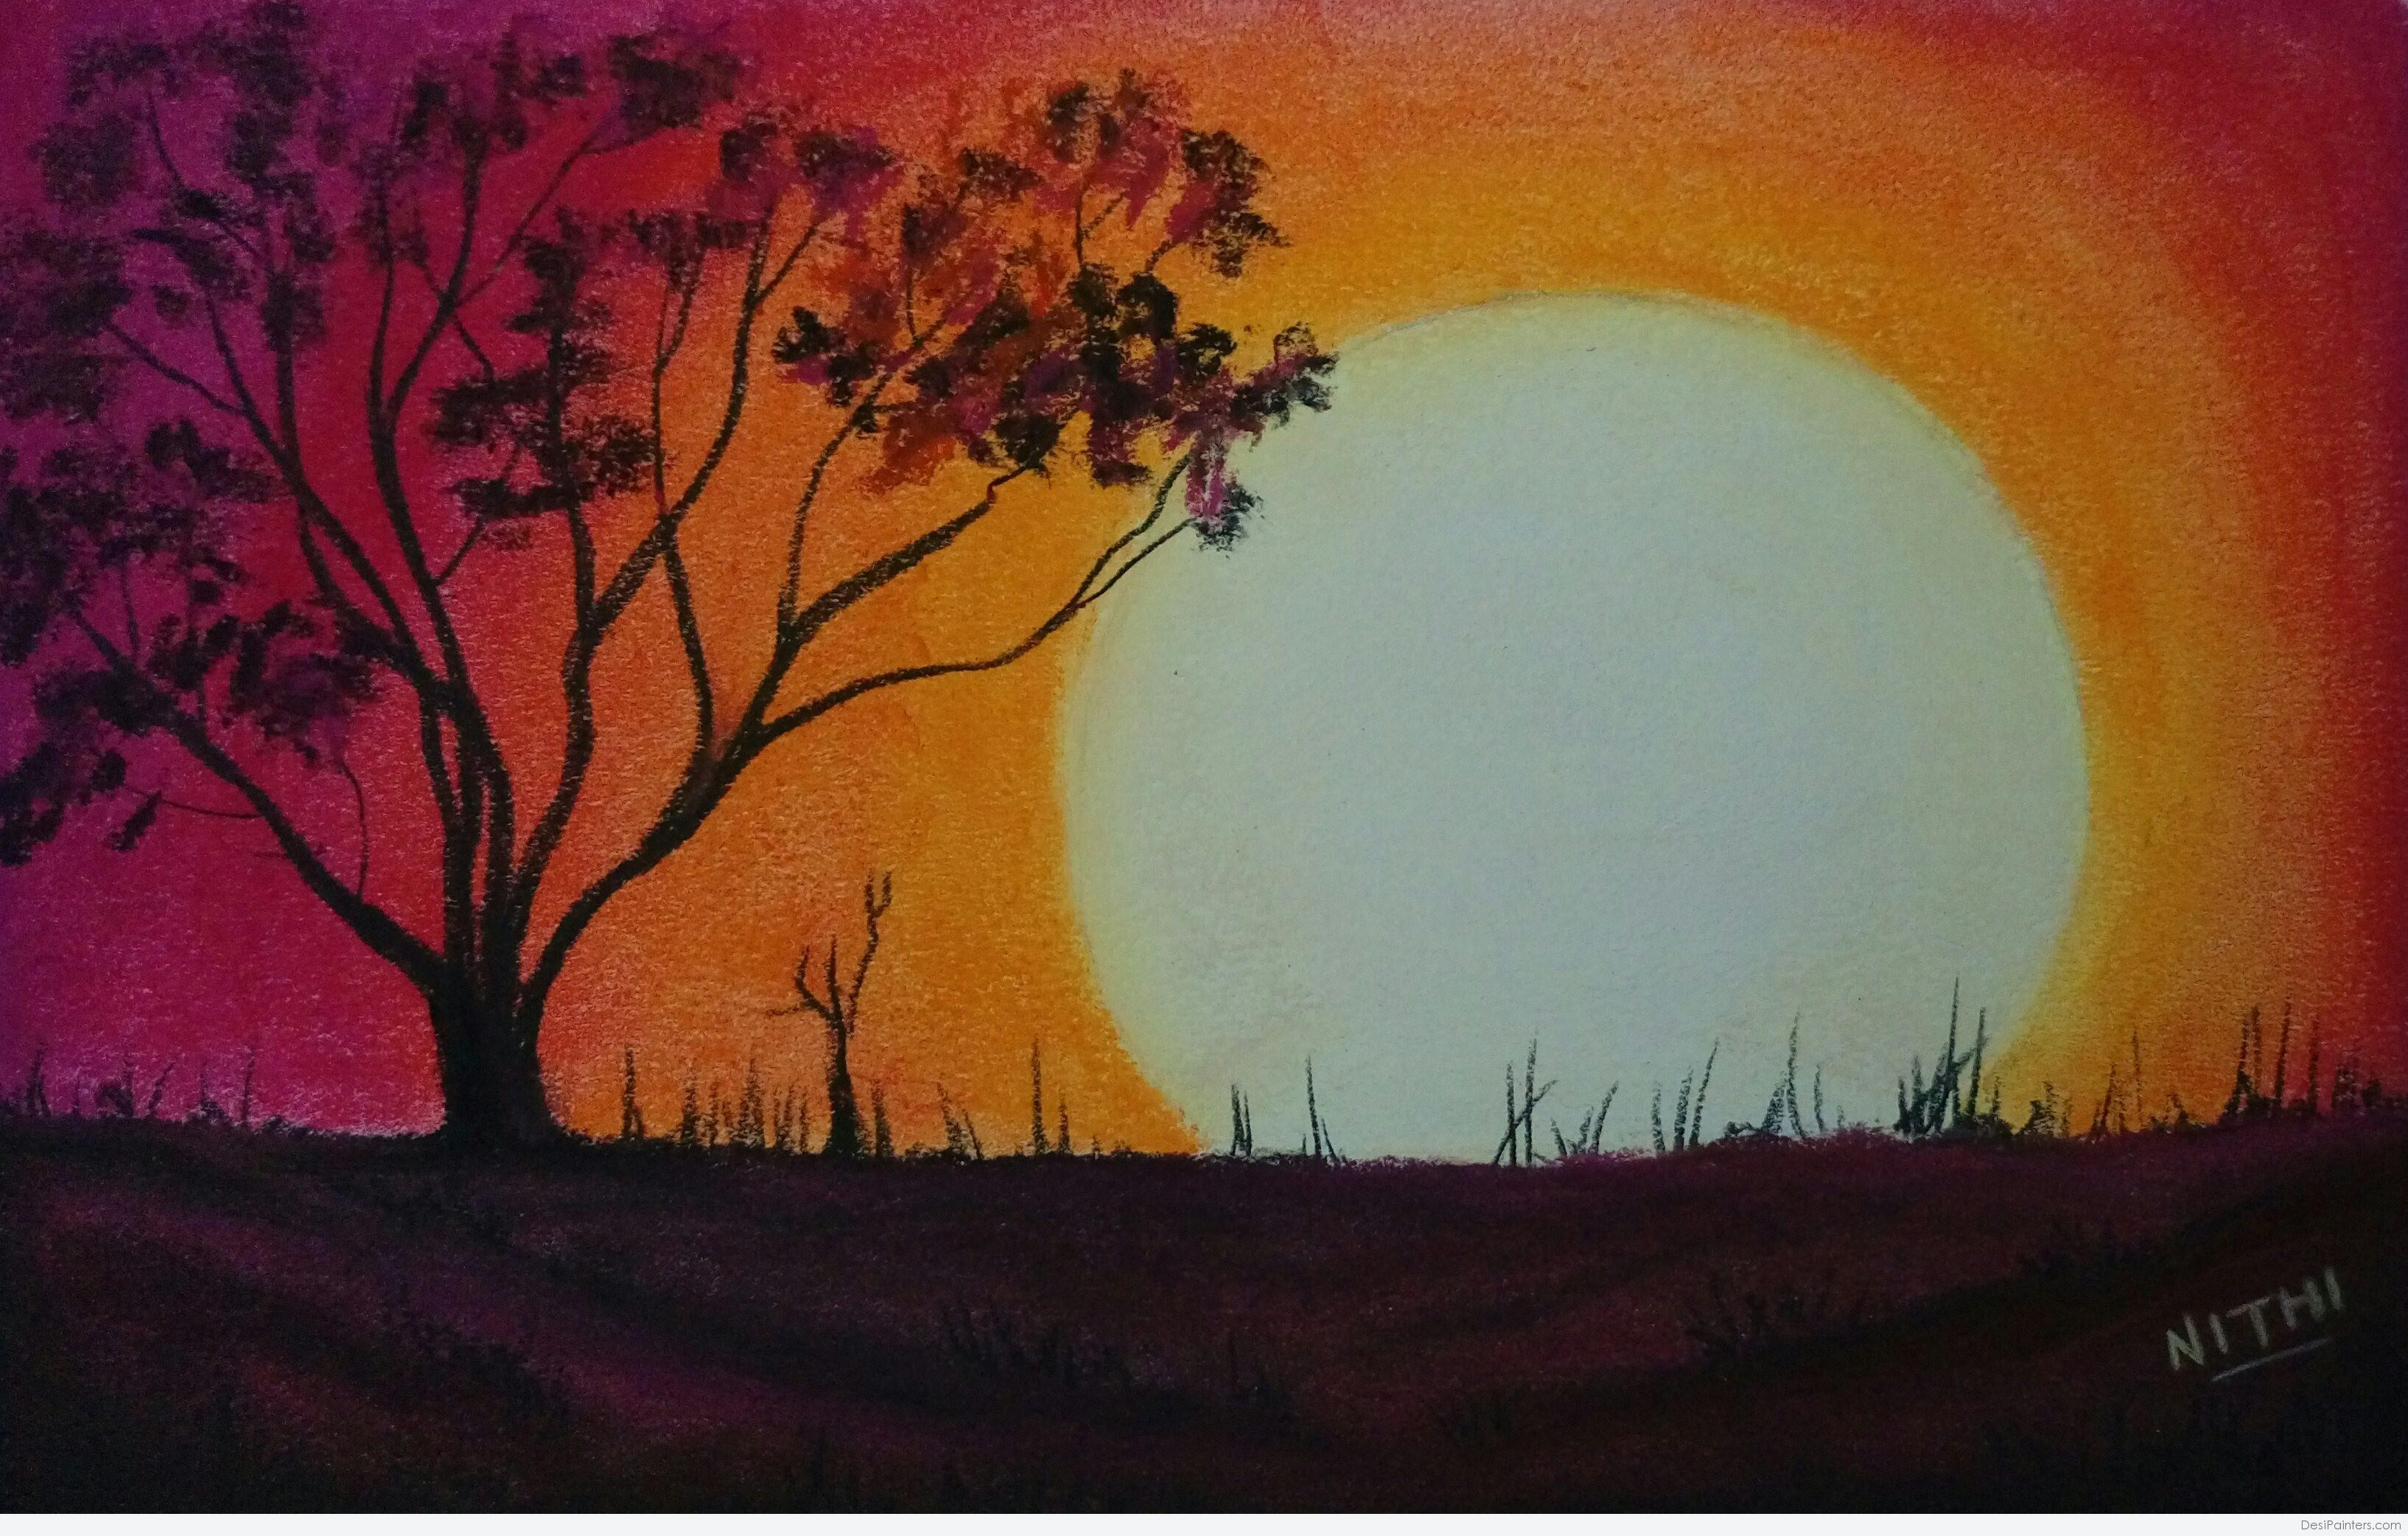 Sunset Sketch at Explore collection of Sunset Sketch